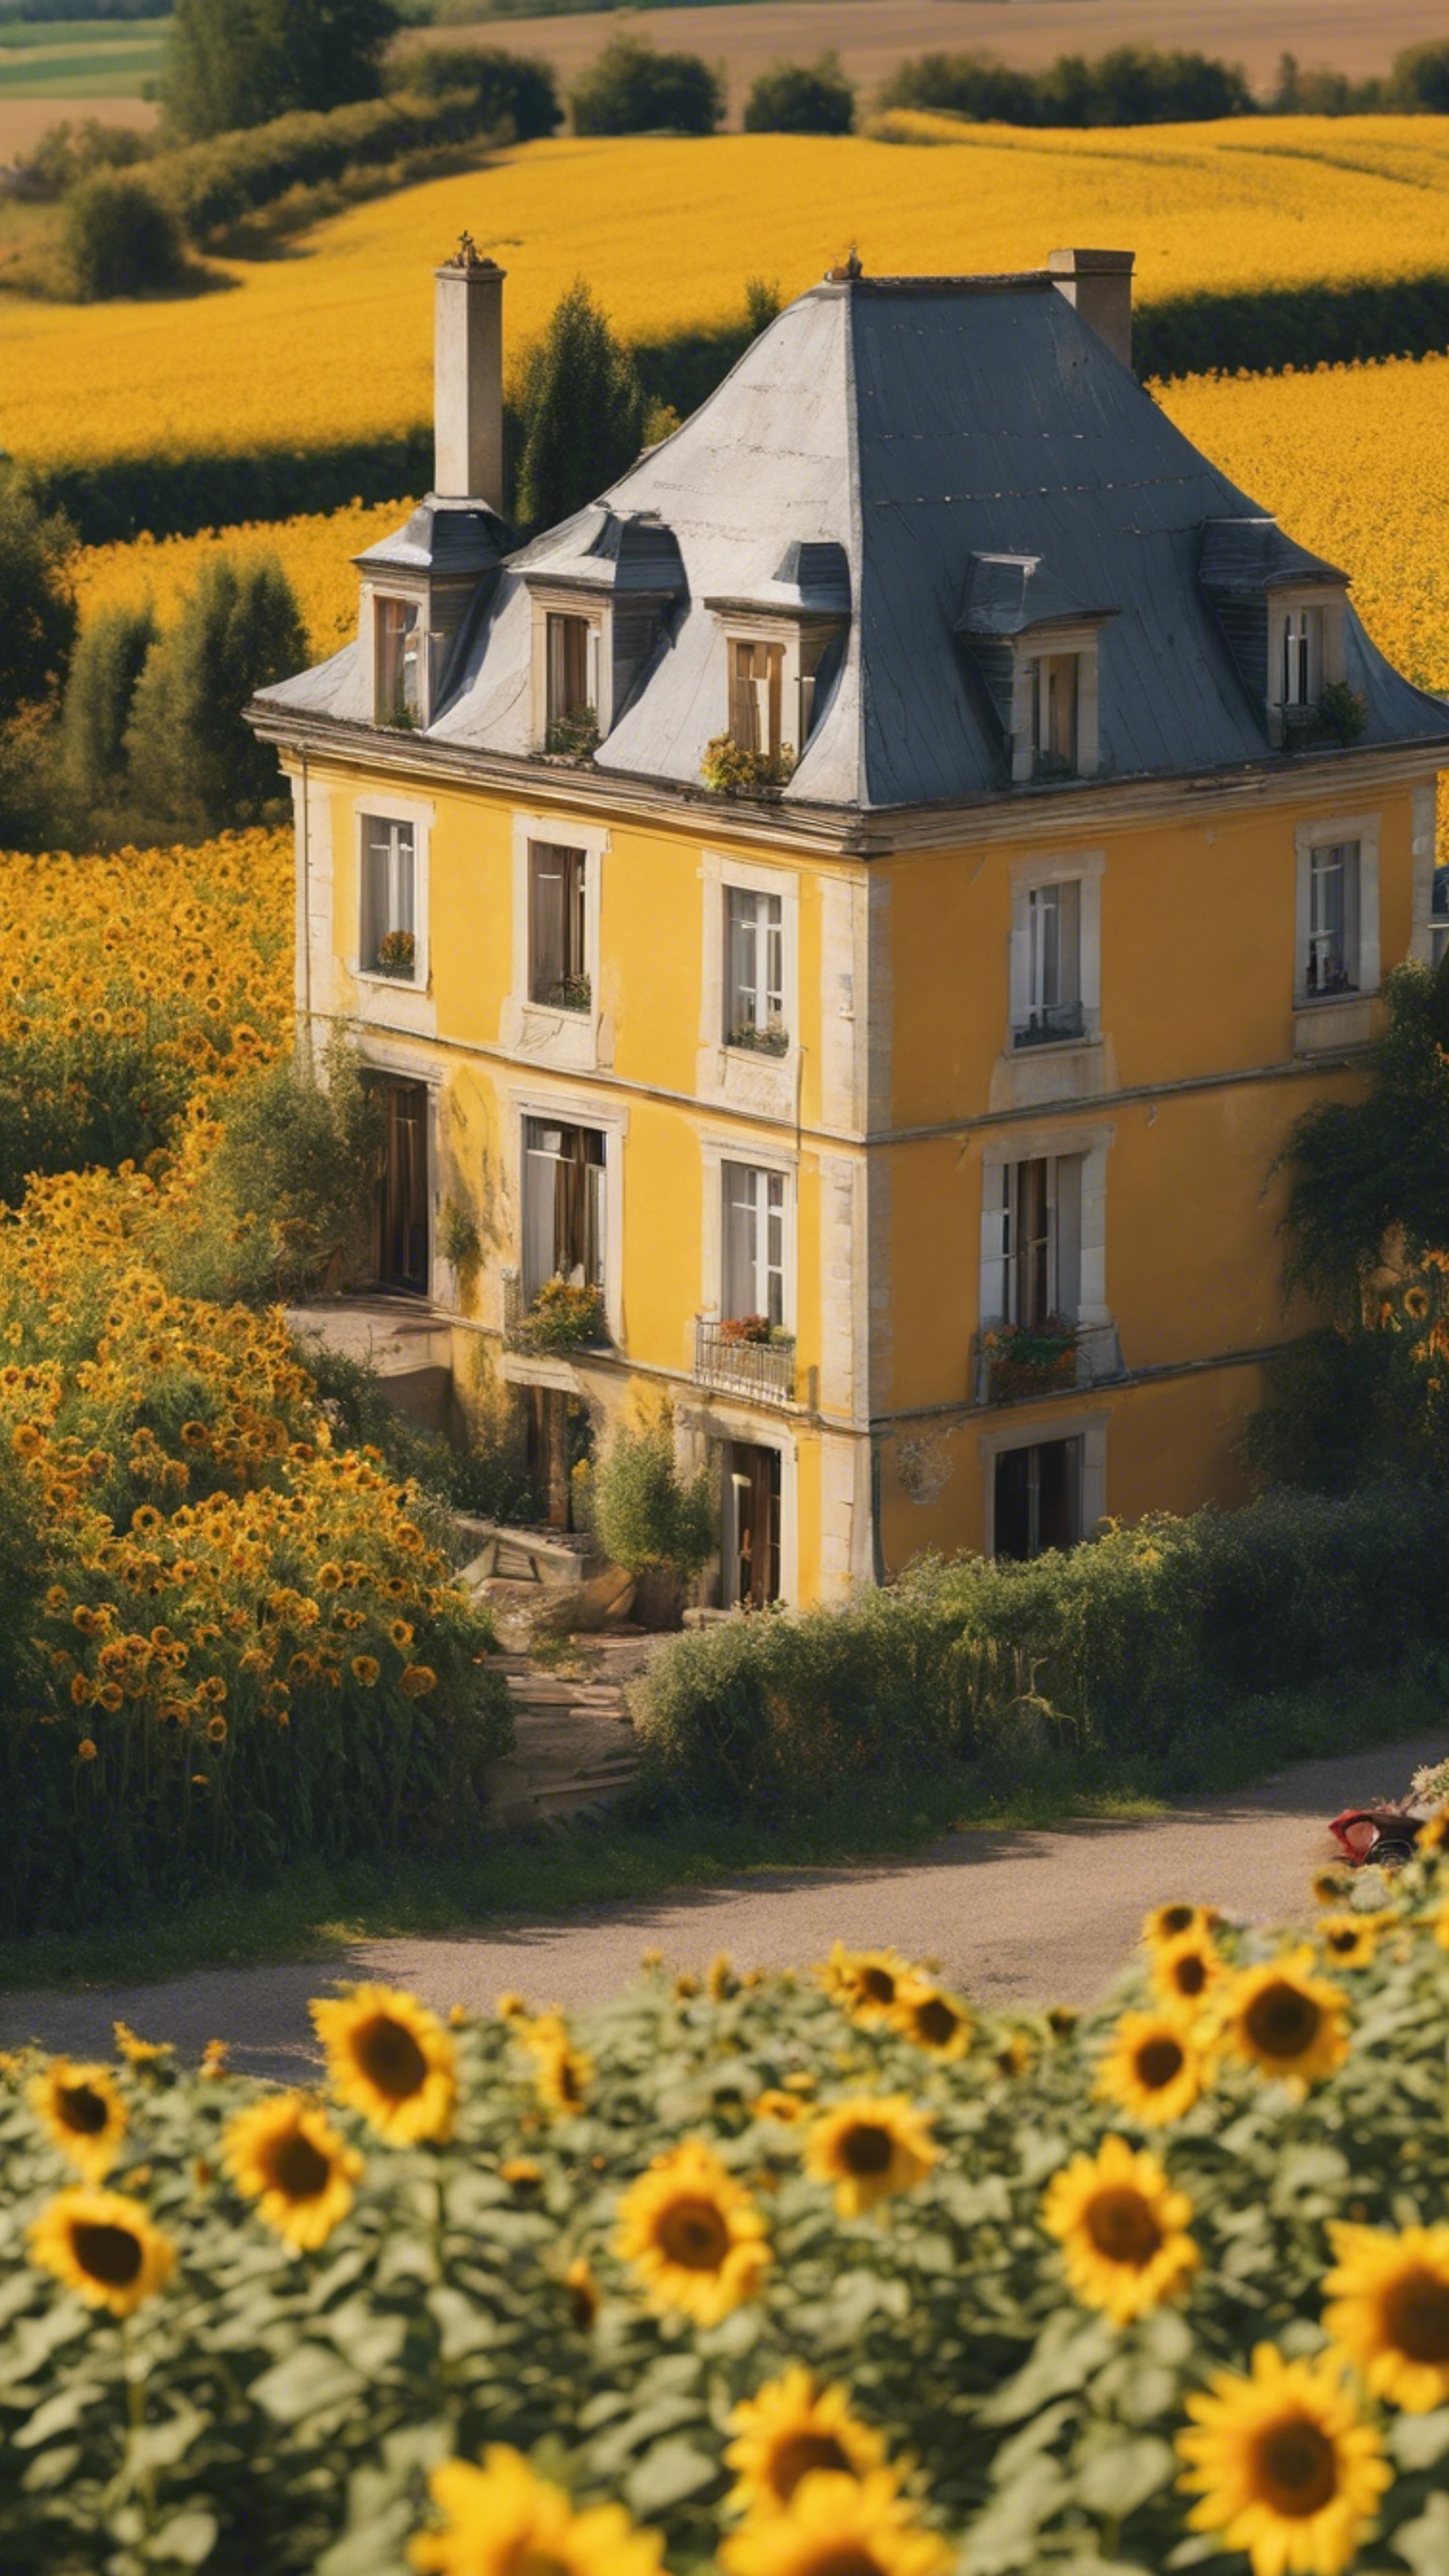 A quaint French country house nestled in a field of bright yellow sunflowers during a sunny afternoon. Wallpaper[7540a515ea0143d58f51]